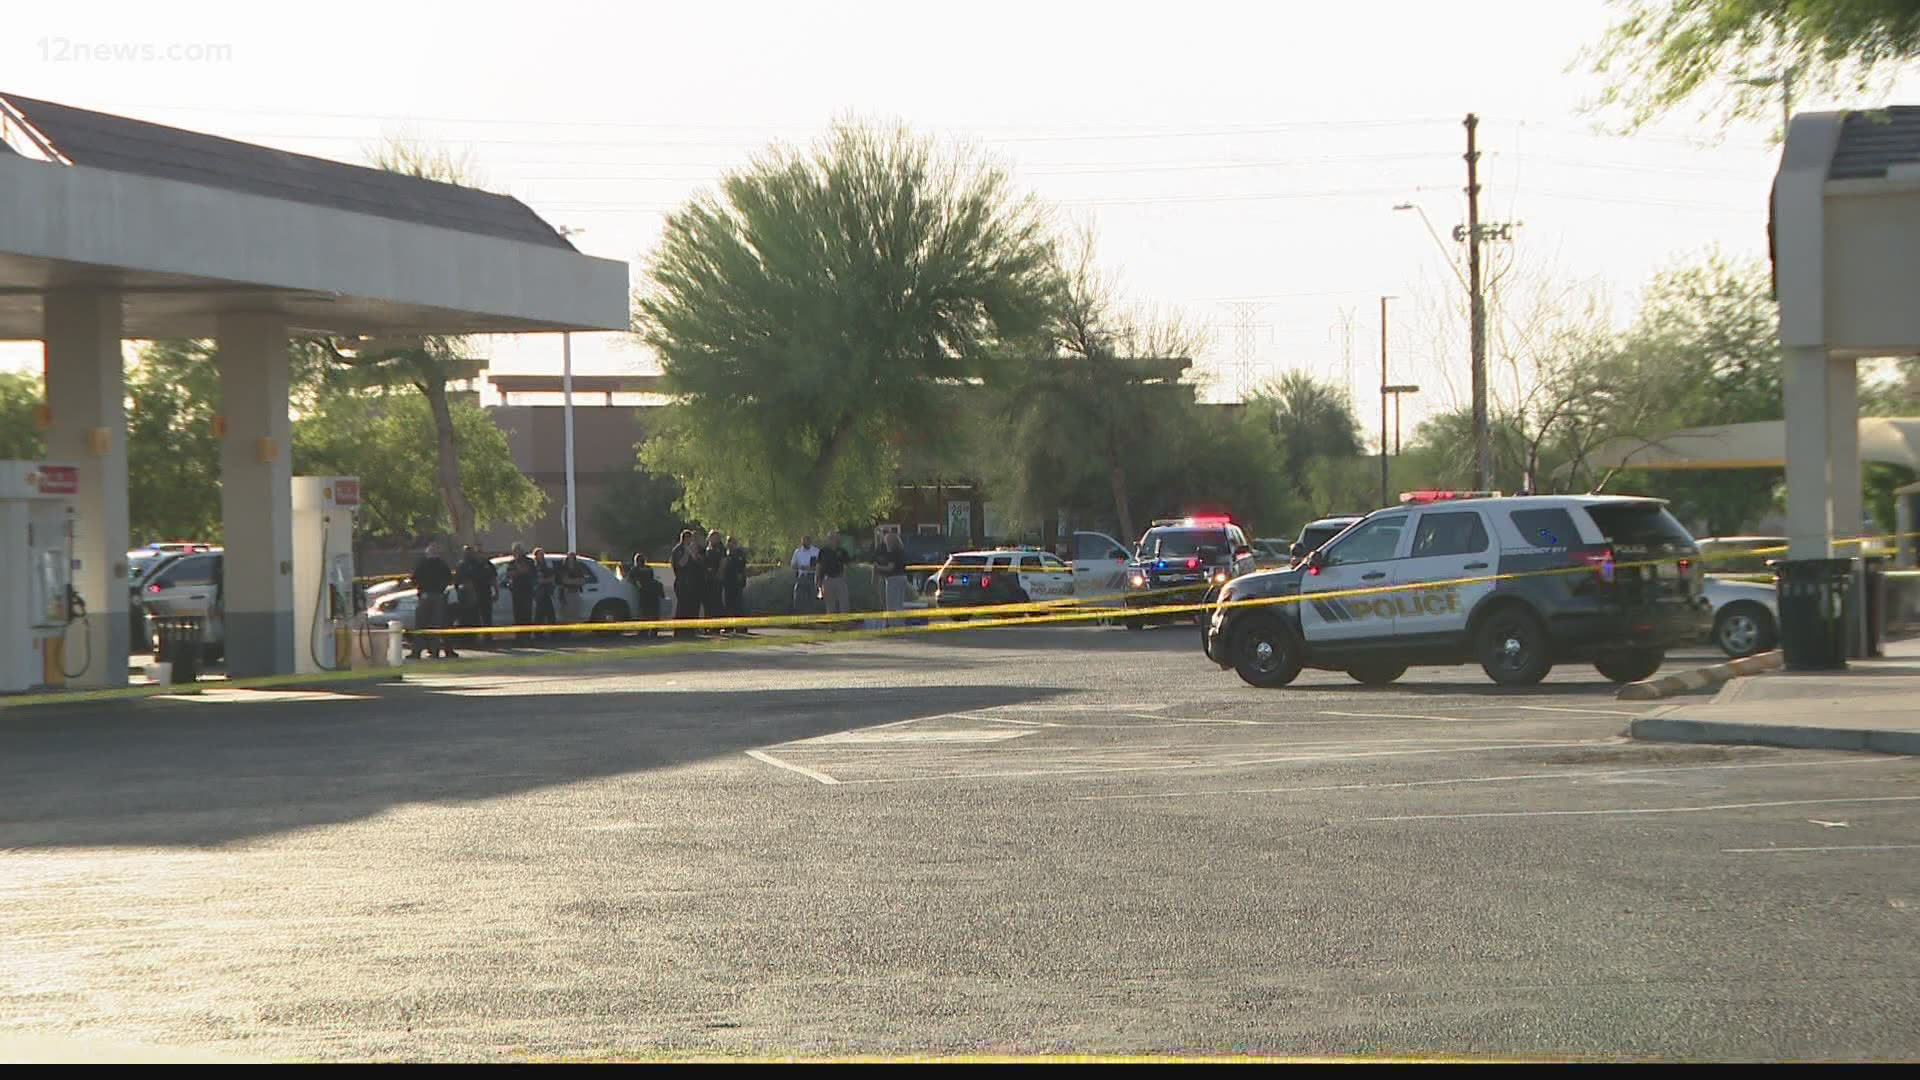 Peoria police say an officer saw a man acting suspiciously and stopped him, leading to a confrontation that ended with the officer fatally shooting him.